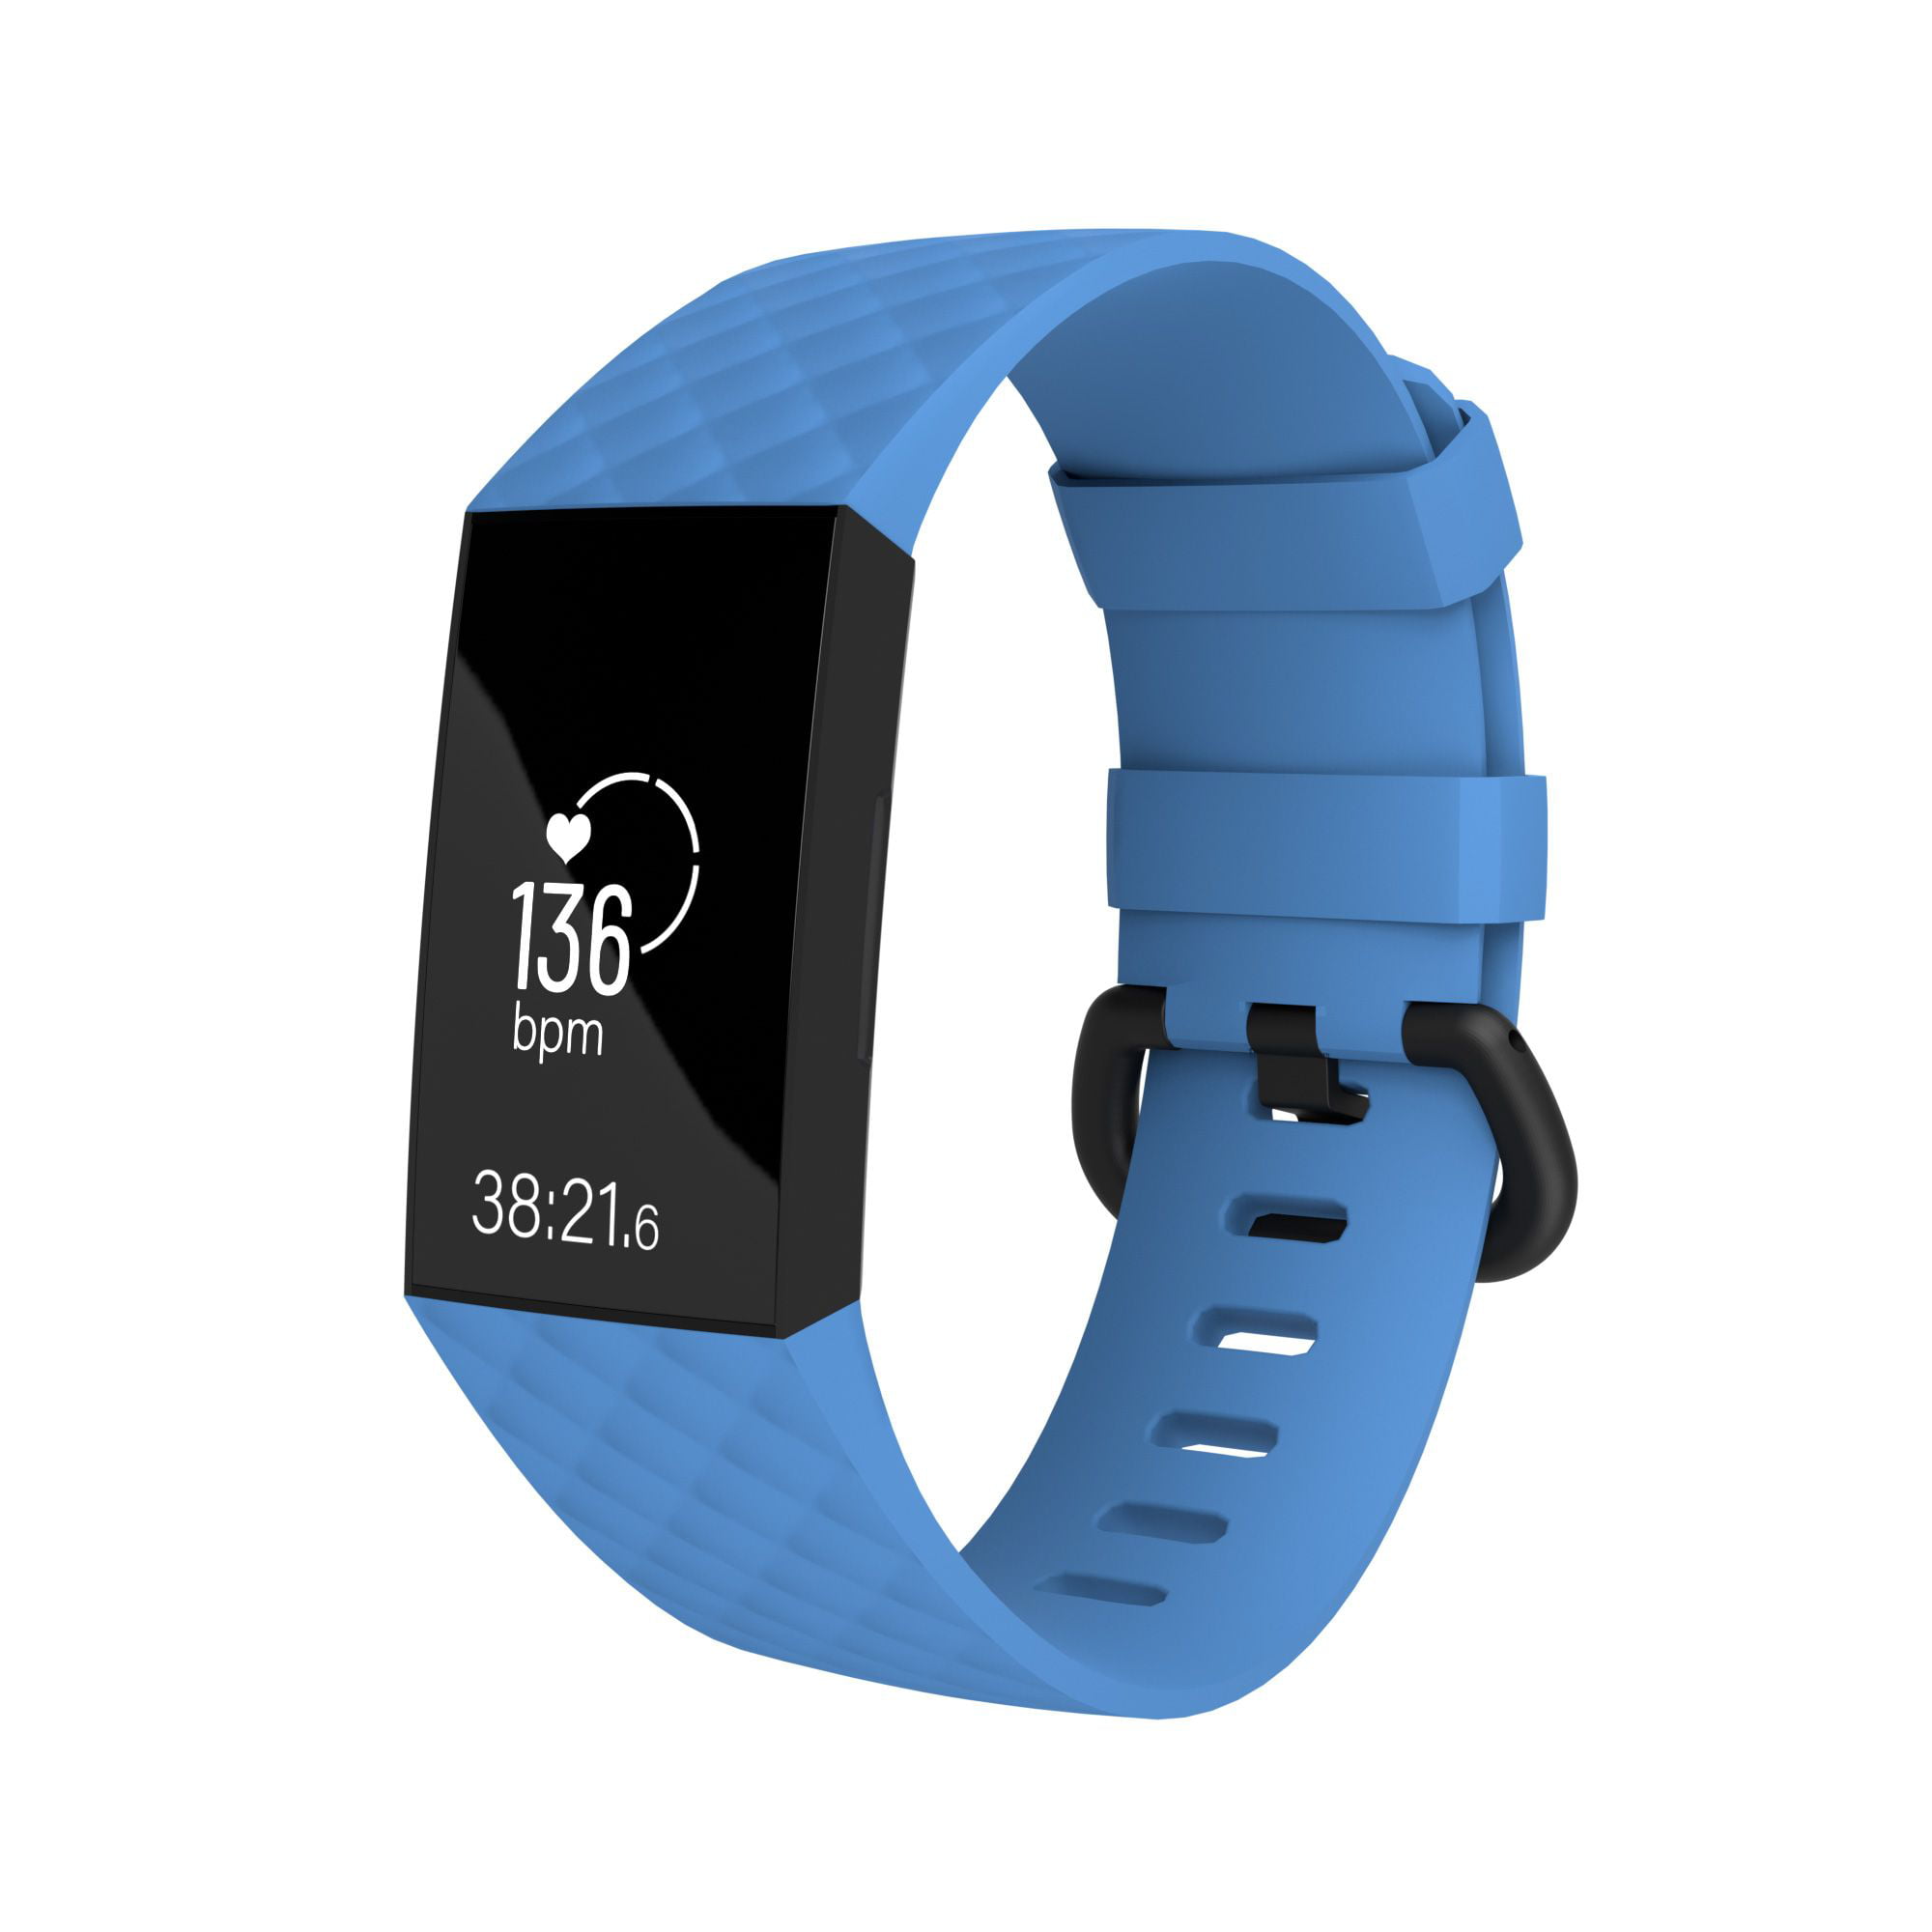 Zodaca - Fitbit Charge 3 bands, by 